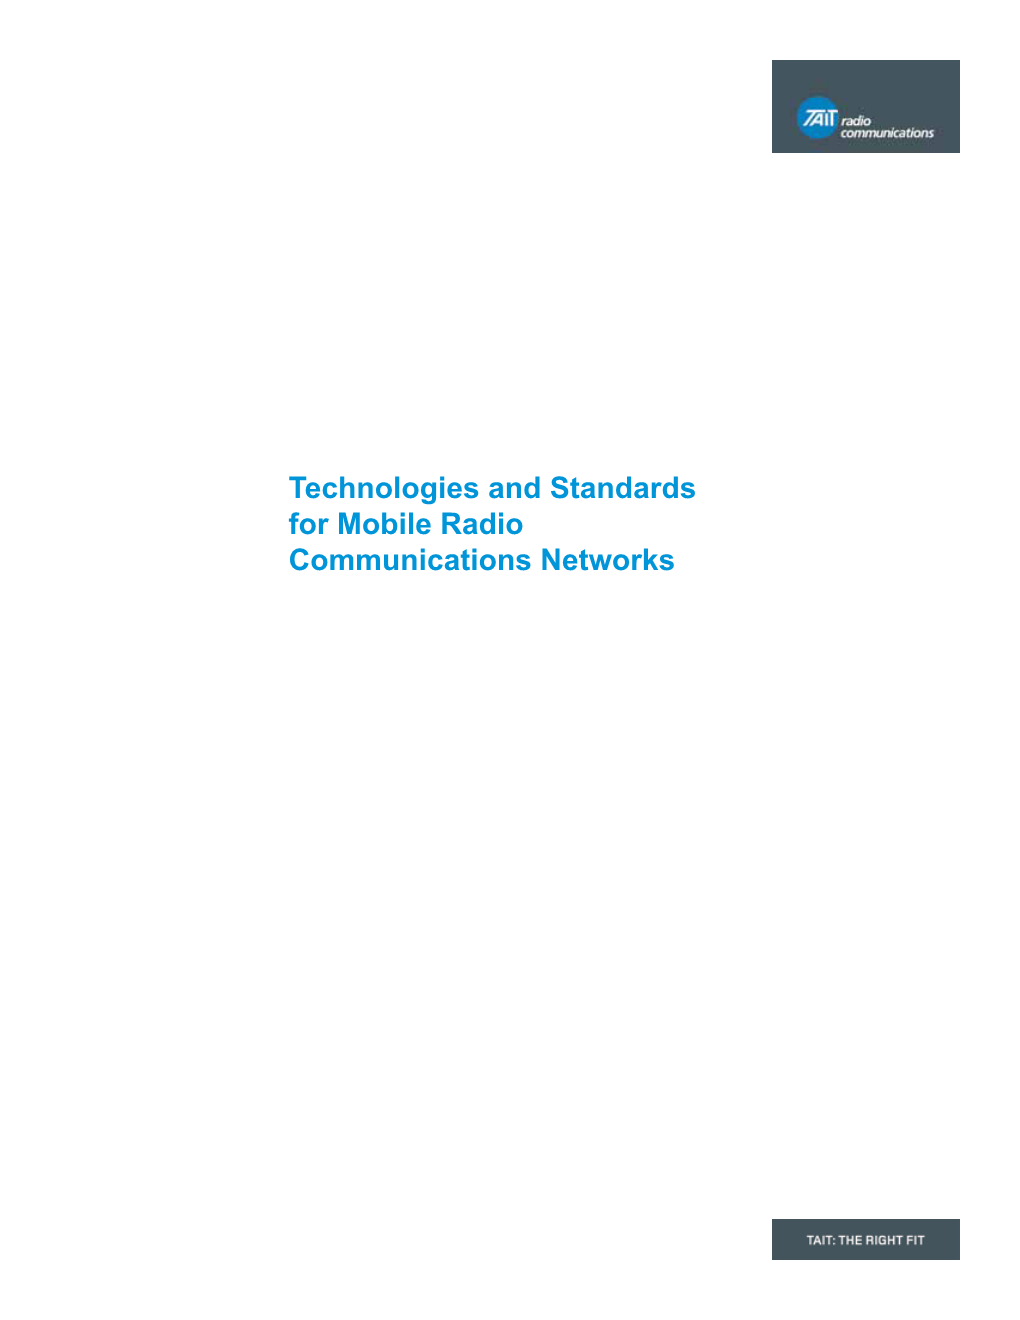 Technologies and Standards for Mobile Radio Communications Networks Contents